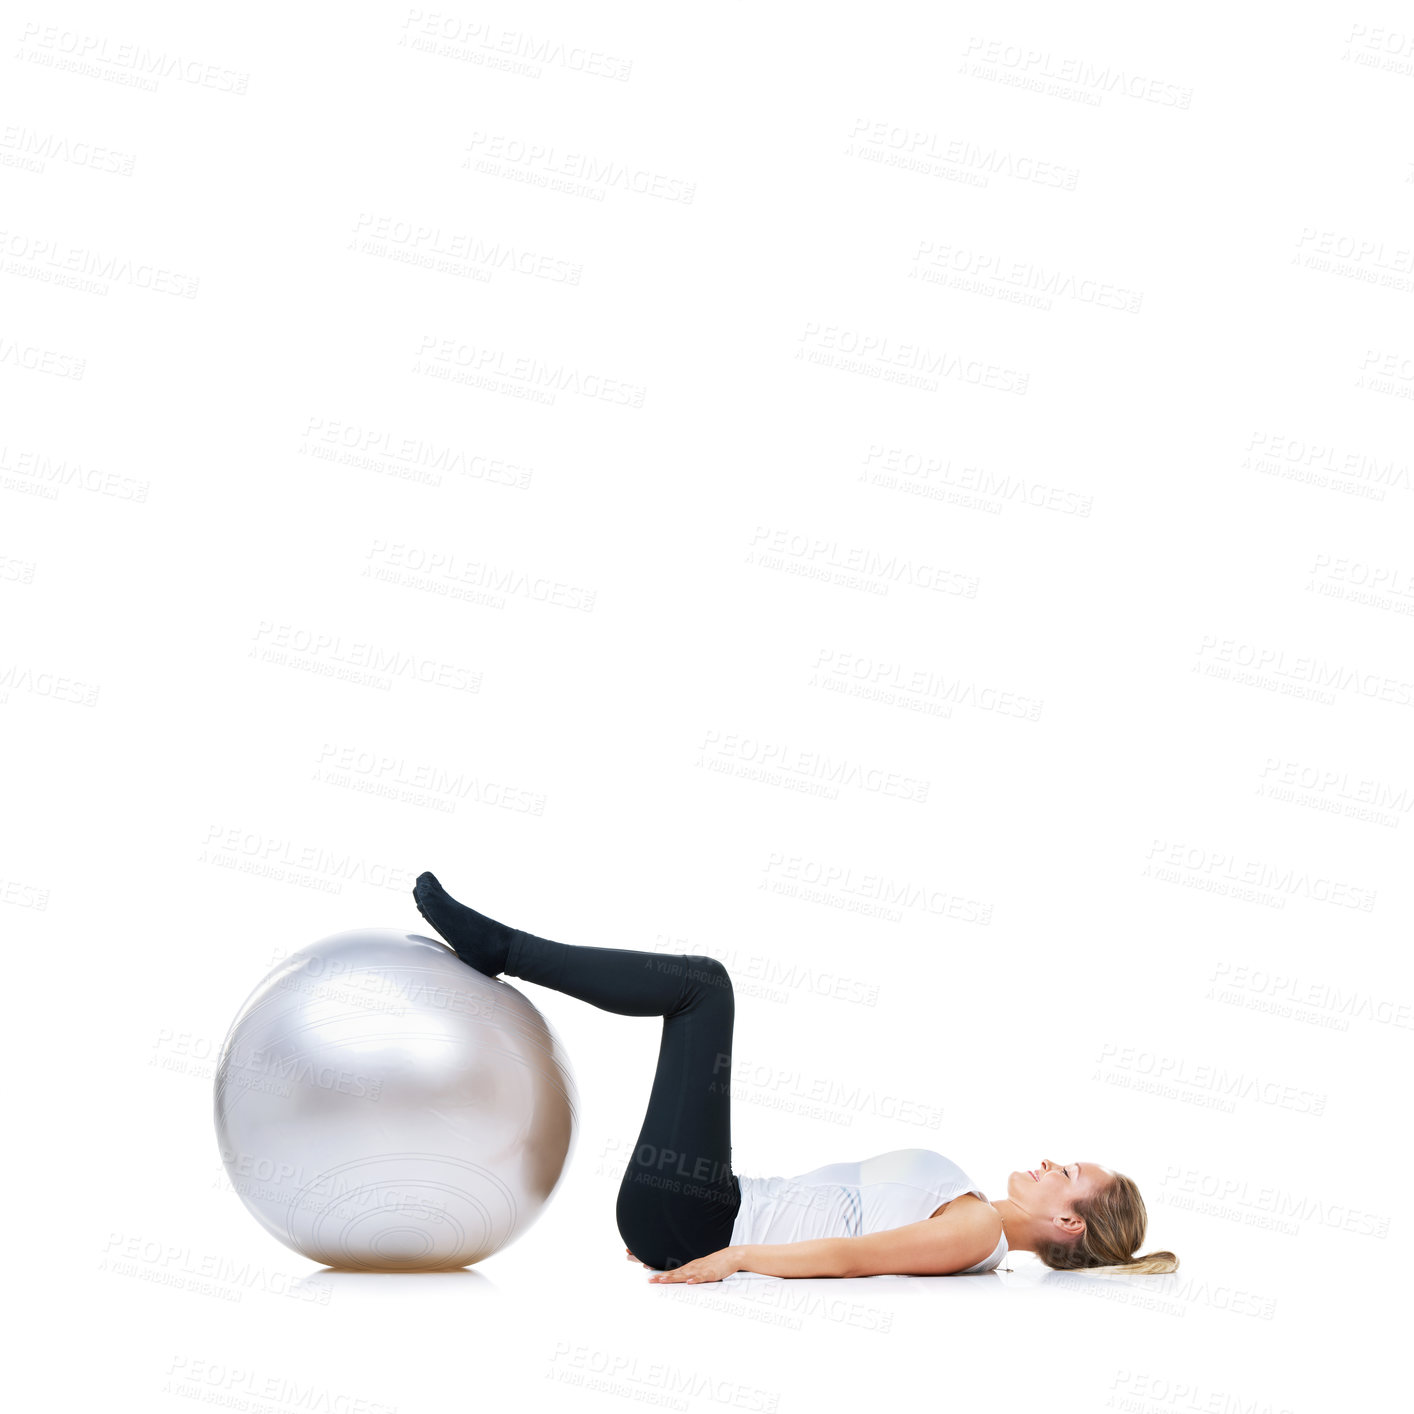 Buy stock photo Legs on ball, woman or balance in studio mockup for workout, wellness or exercise on white background. Athlete, training equipment or fitness for core challenge, body mobility or flexibility space 